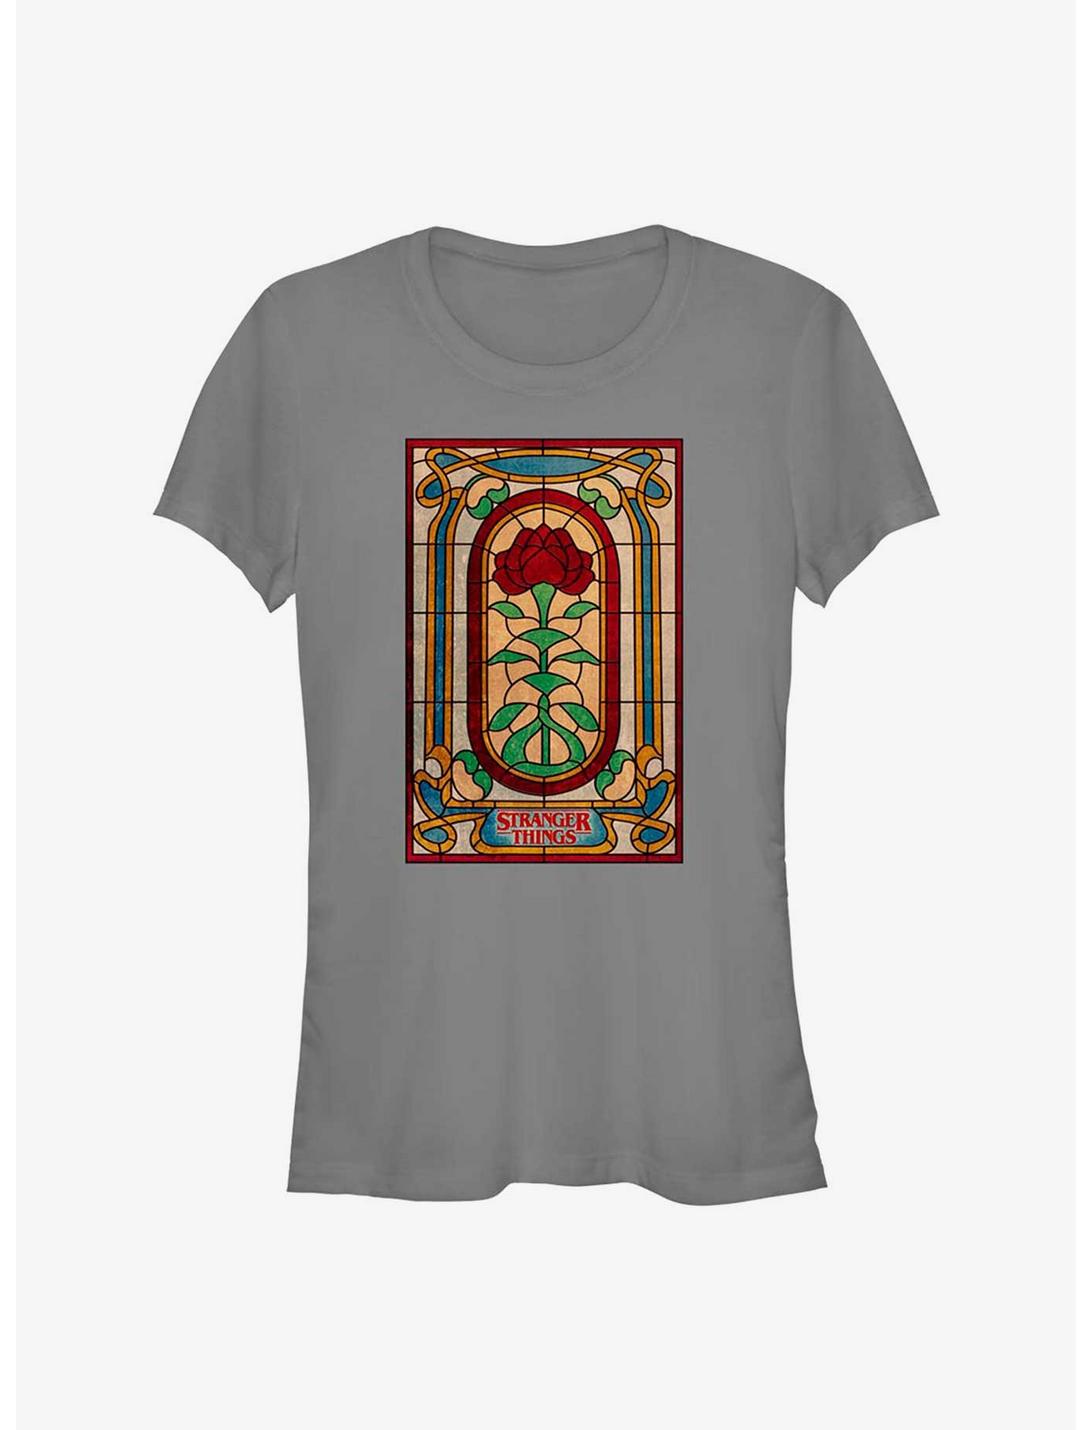 Stranger Things Stained Glass Rose Girls T-Shirt, CHARCOAL, hi-res